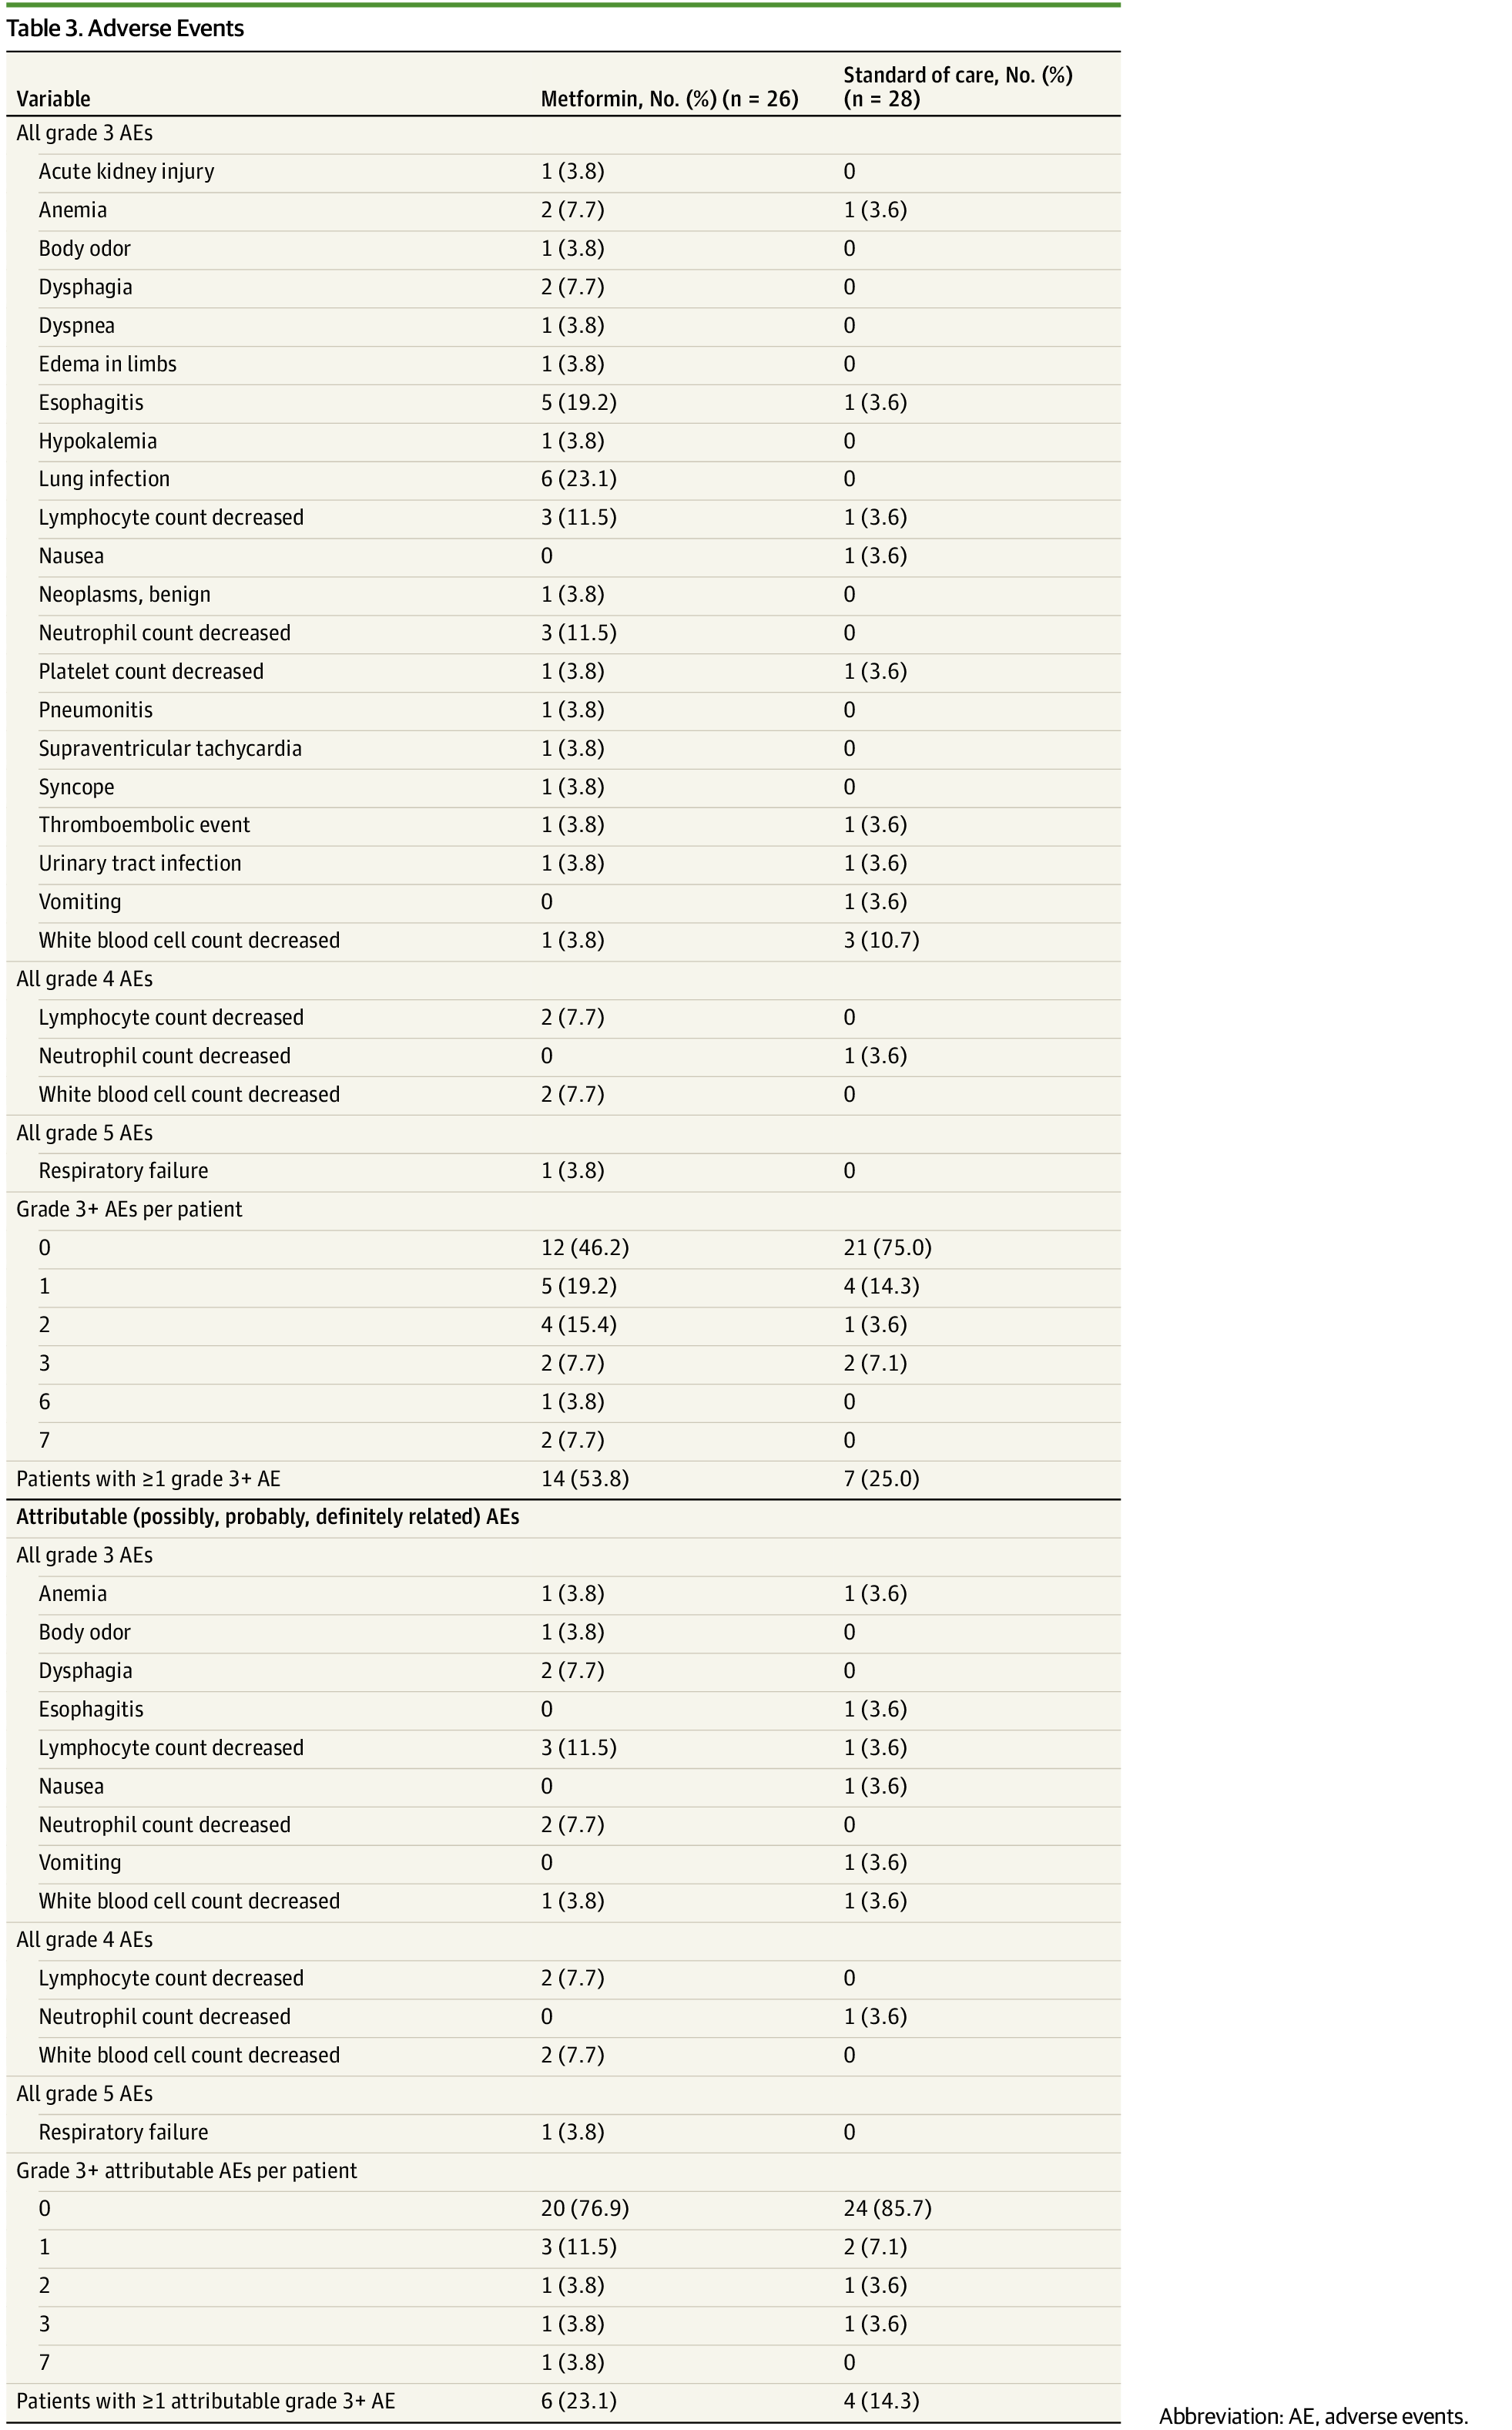 Metformin in Combination With Chemoradiotherapy in Locally Advanced Non–Small Cell Lung Cancer